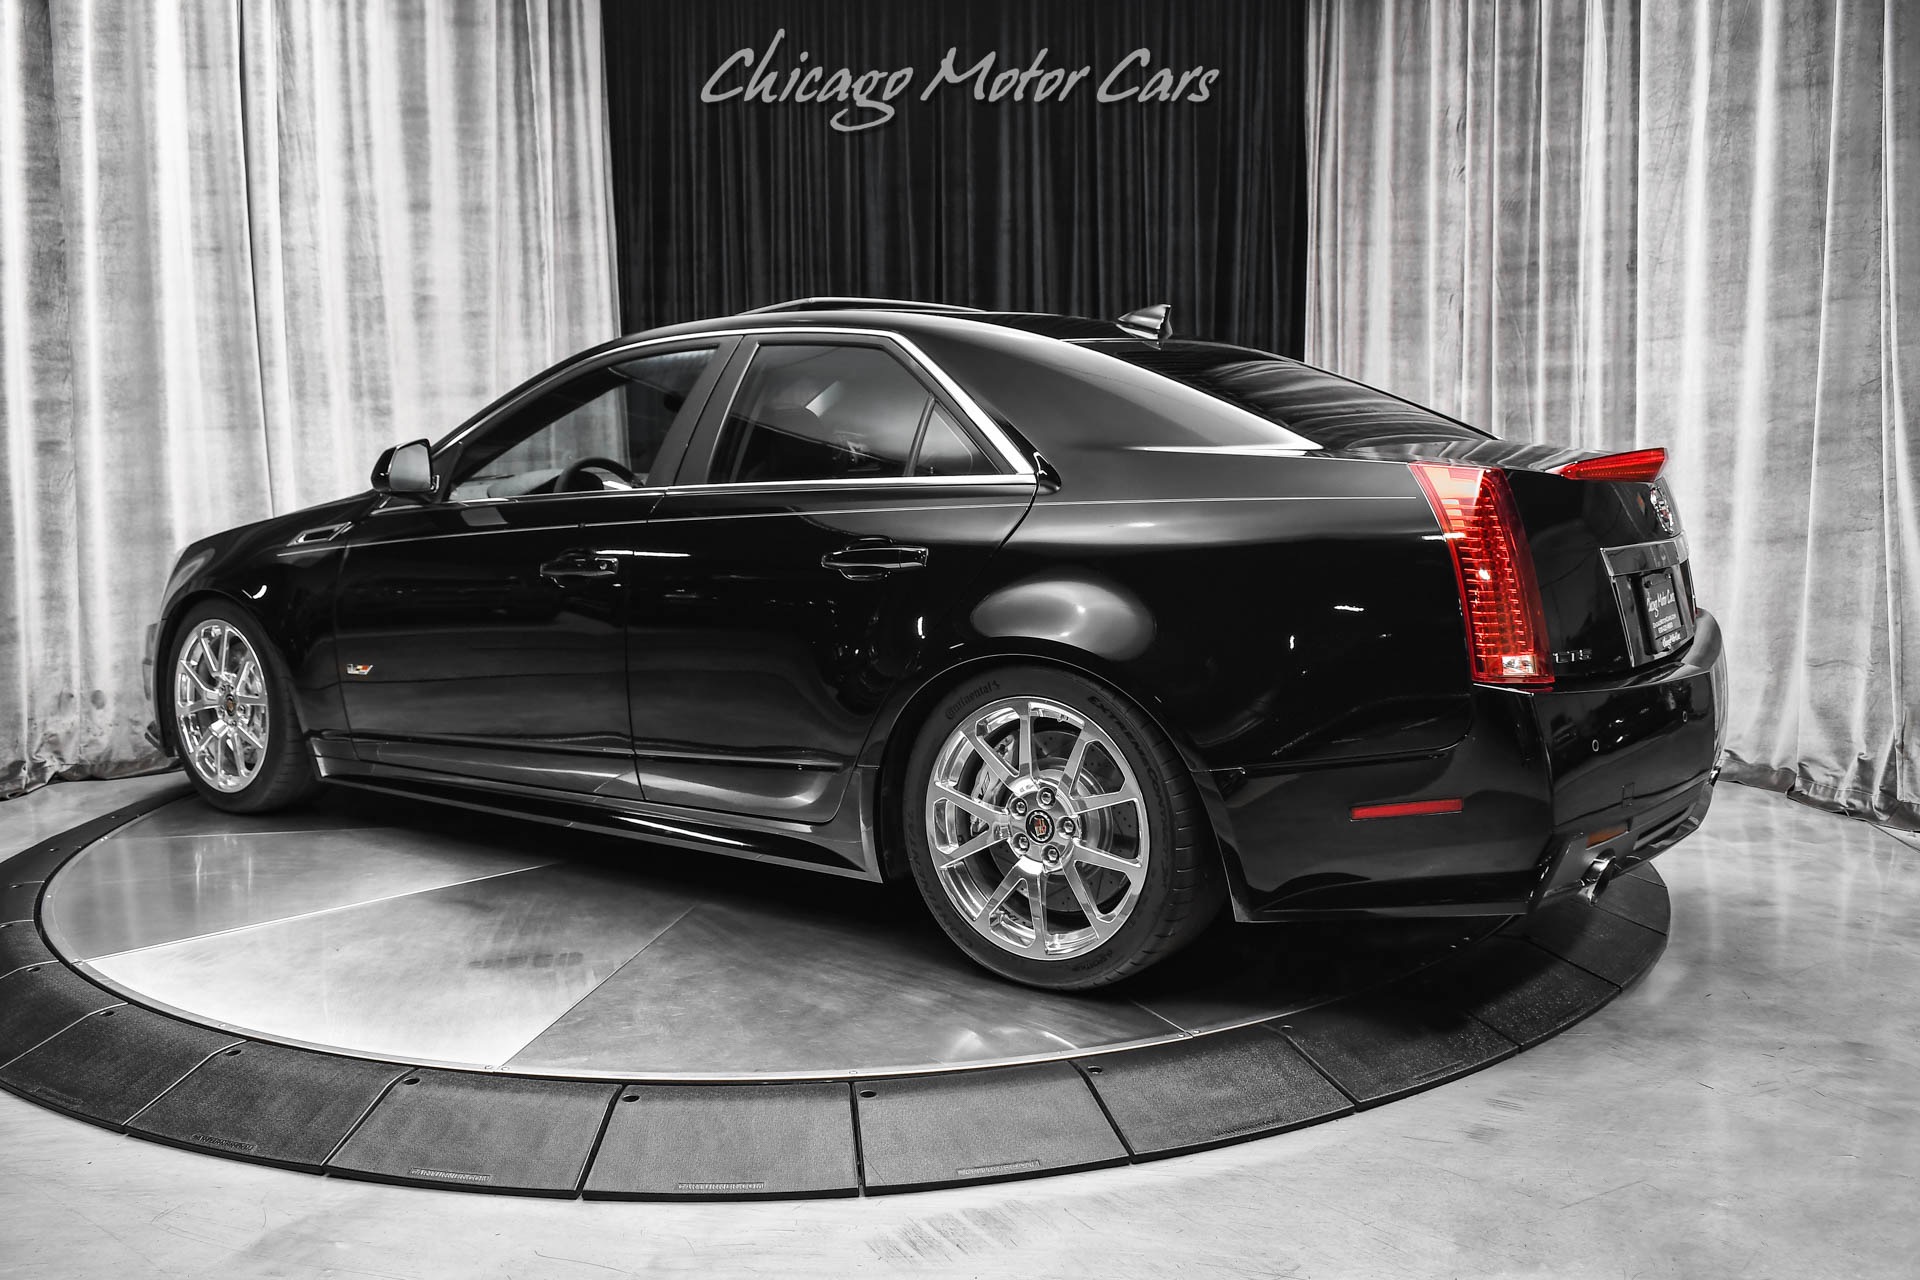 Used-2012-Cadillac-CTS-V-Recaro-Seats-OVER-15K-in-Extras-KW-Coilovers-Kooks-ZL1-Lid